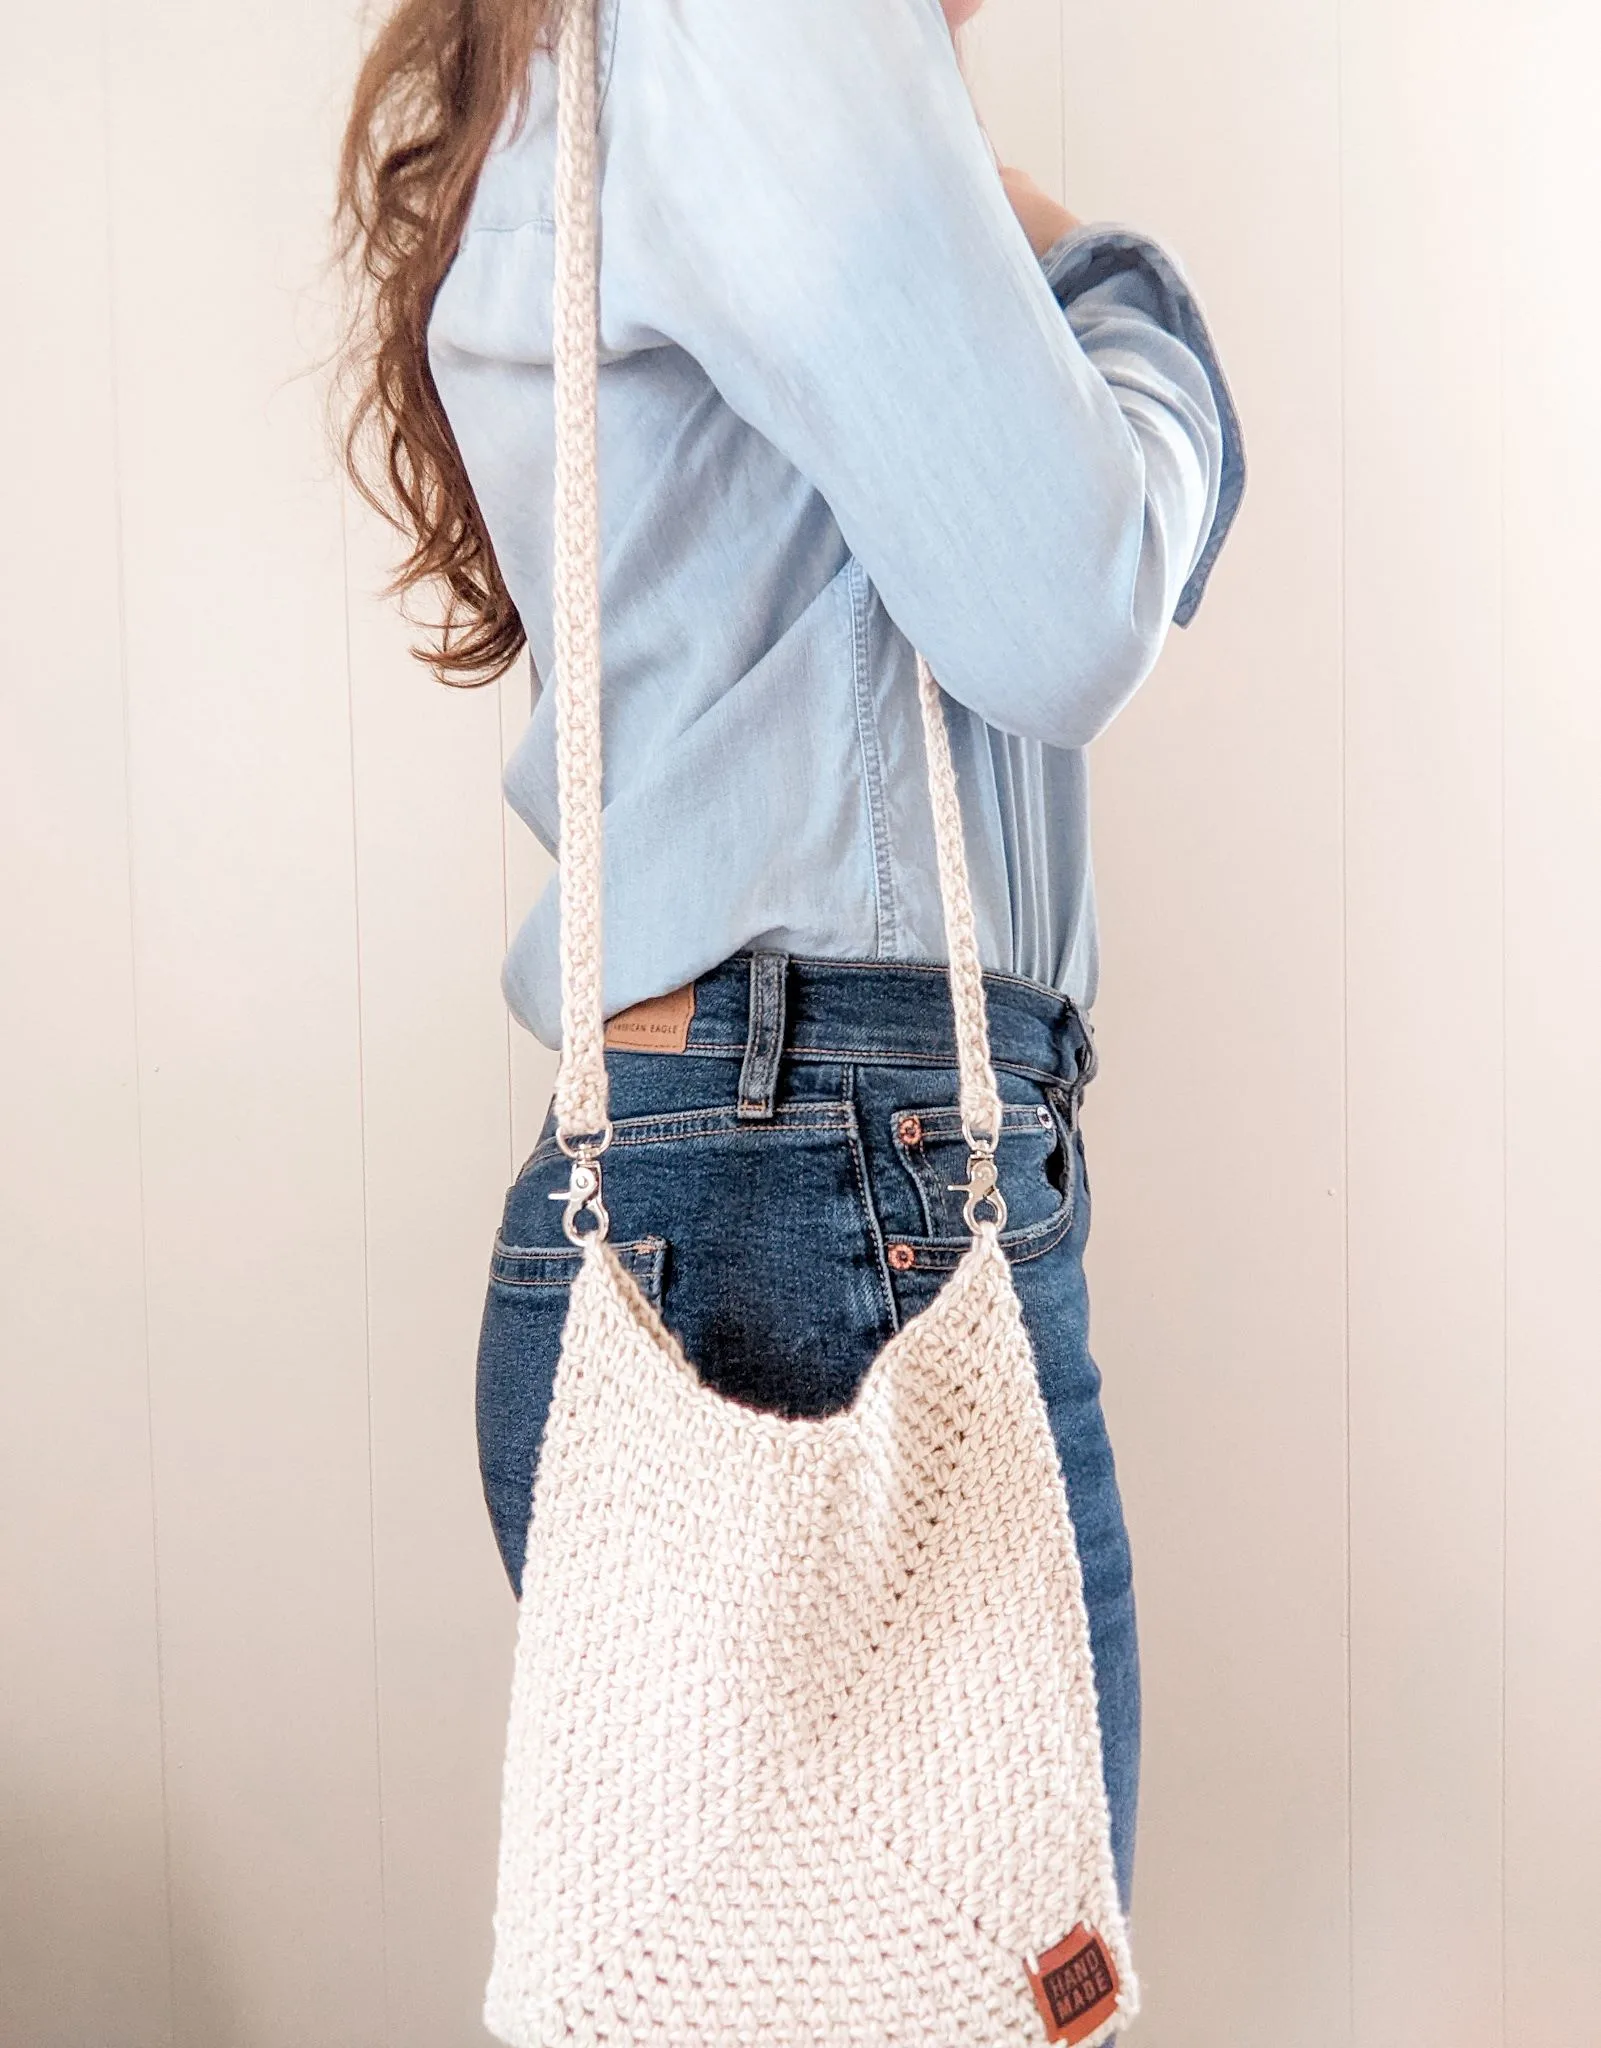 A side view of the crochet crossbody bag pattern.